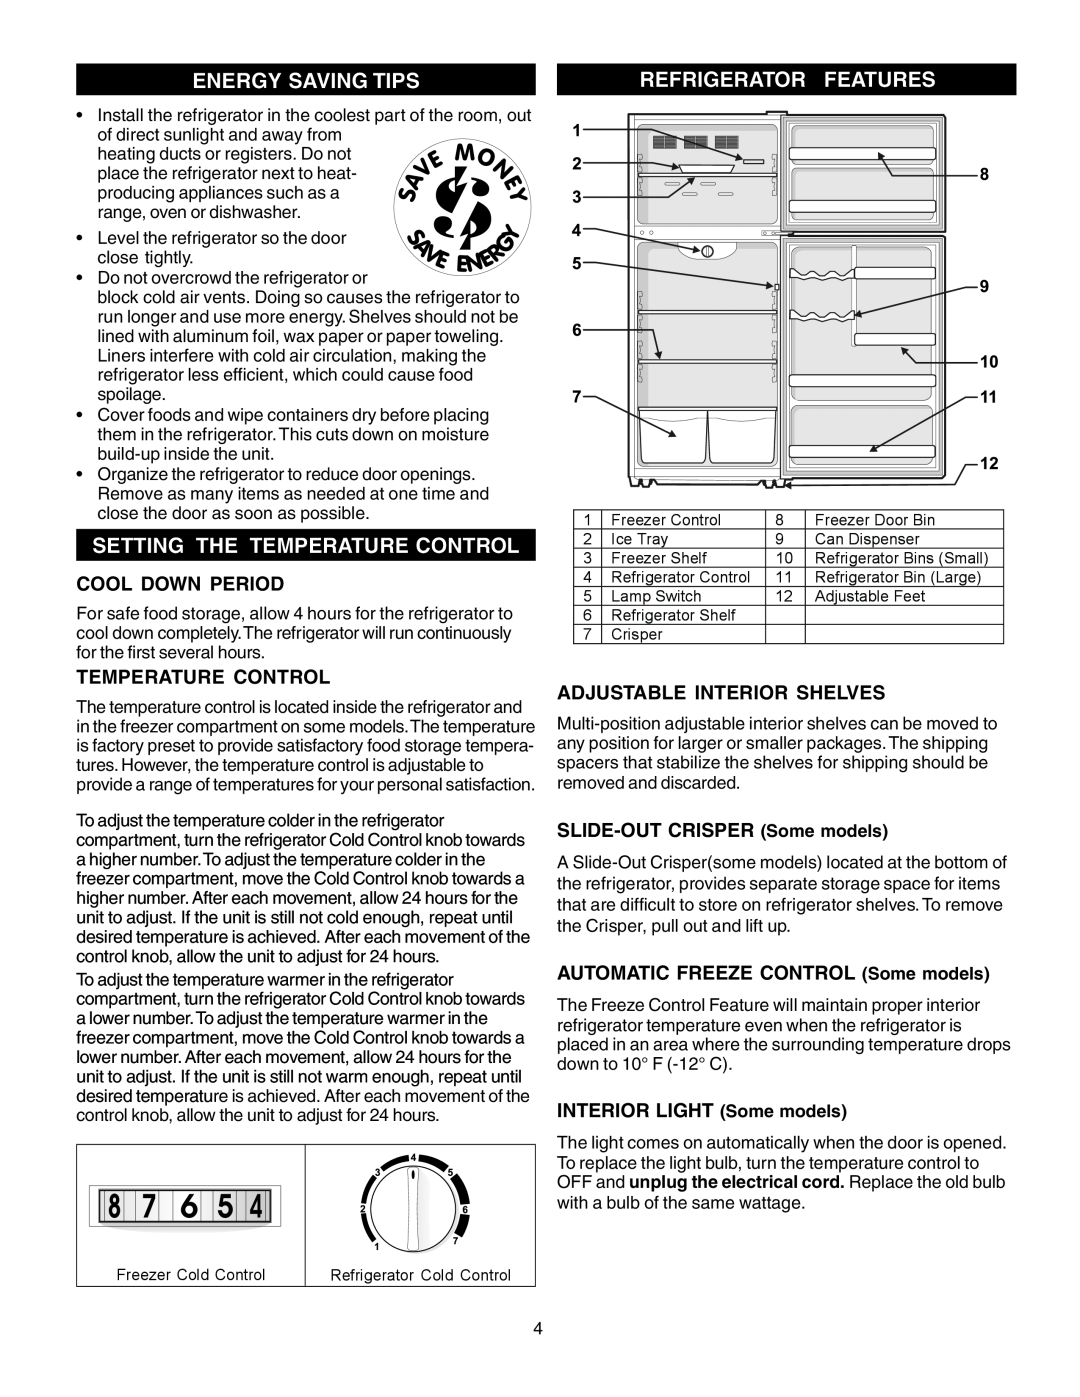 Frigidaire FRT105GW0 warranty Energy Saving Tips, Refrigerator Features, Setting The Temperature Control, Cool Down Period 